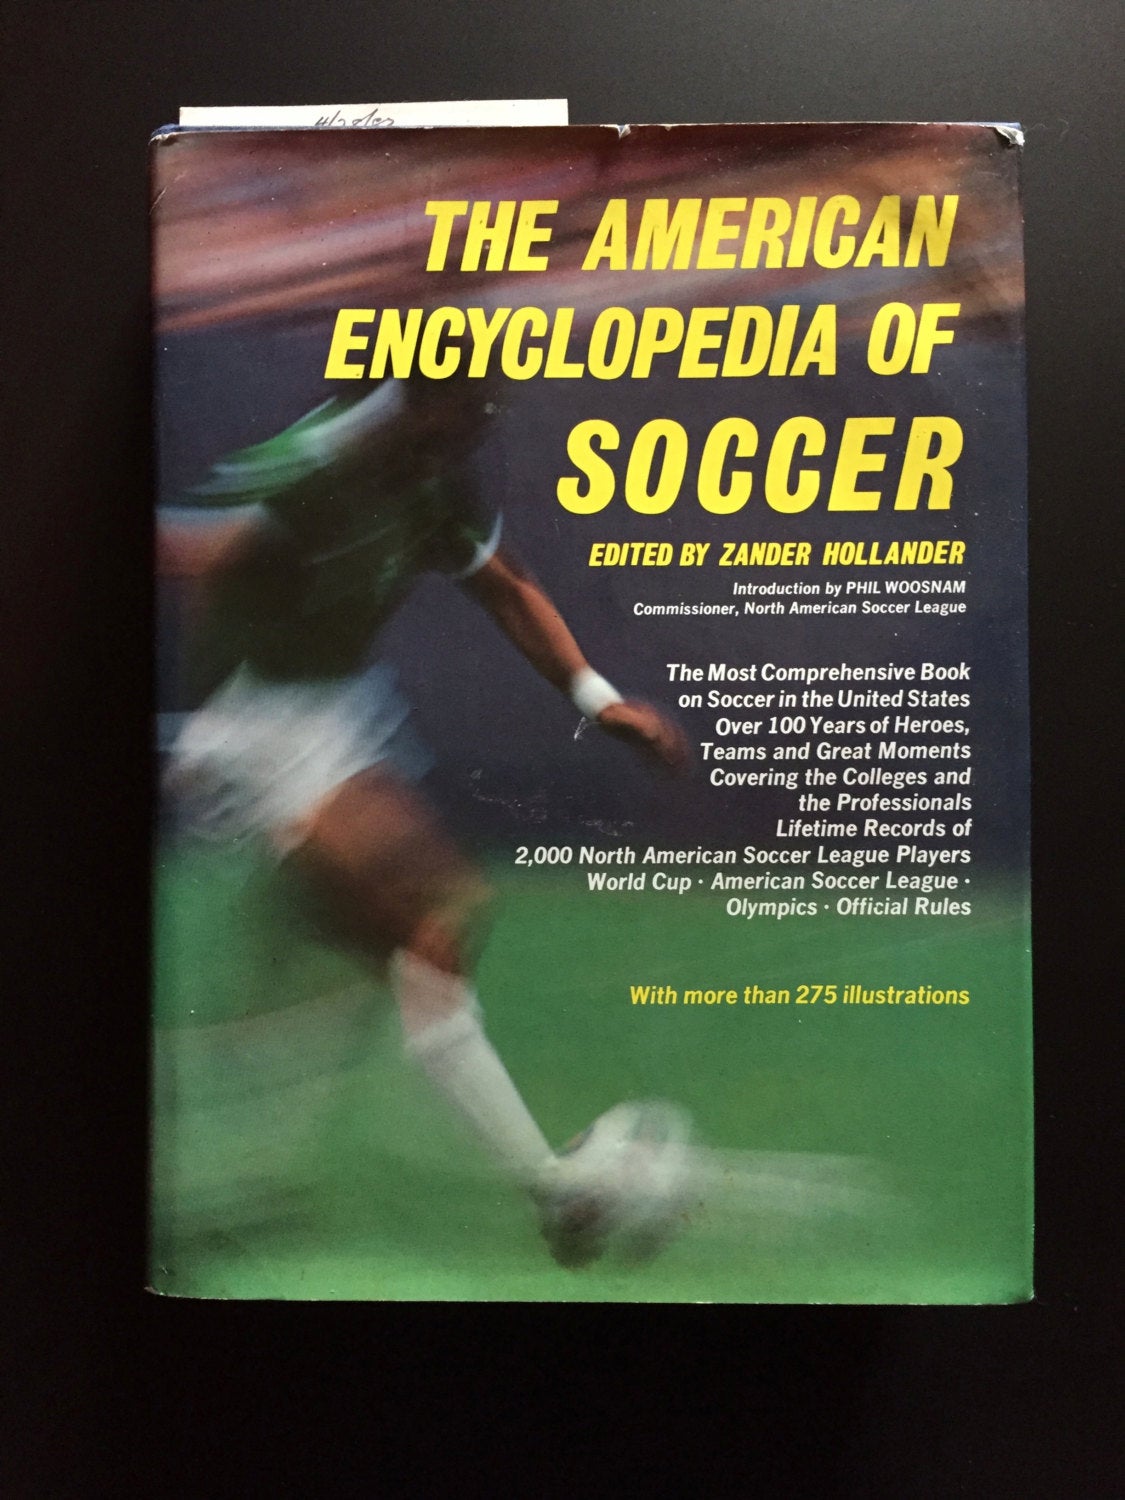 Soccer Fan's Dream! Book signed by PELE, BECKENBAUER, CHINAGLIA, Alberto, and more! 1st. Ed., Illustrated